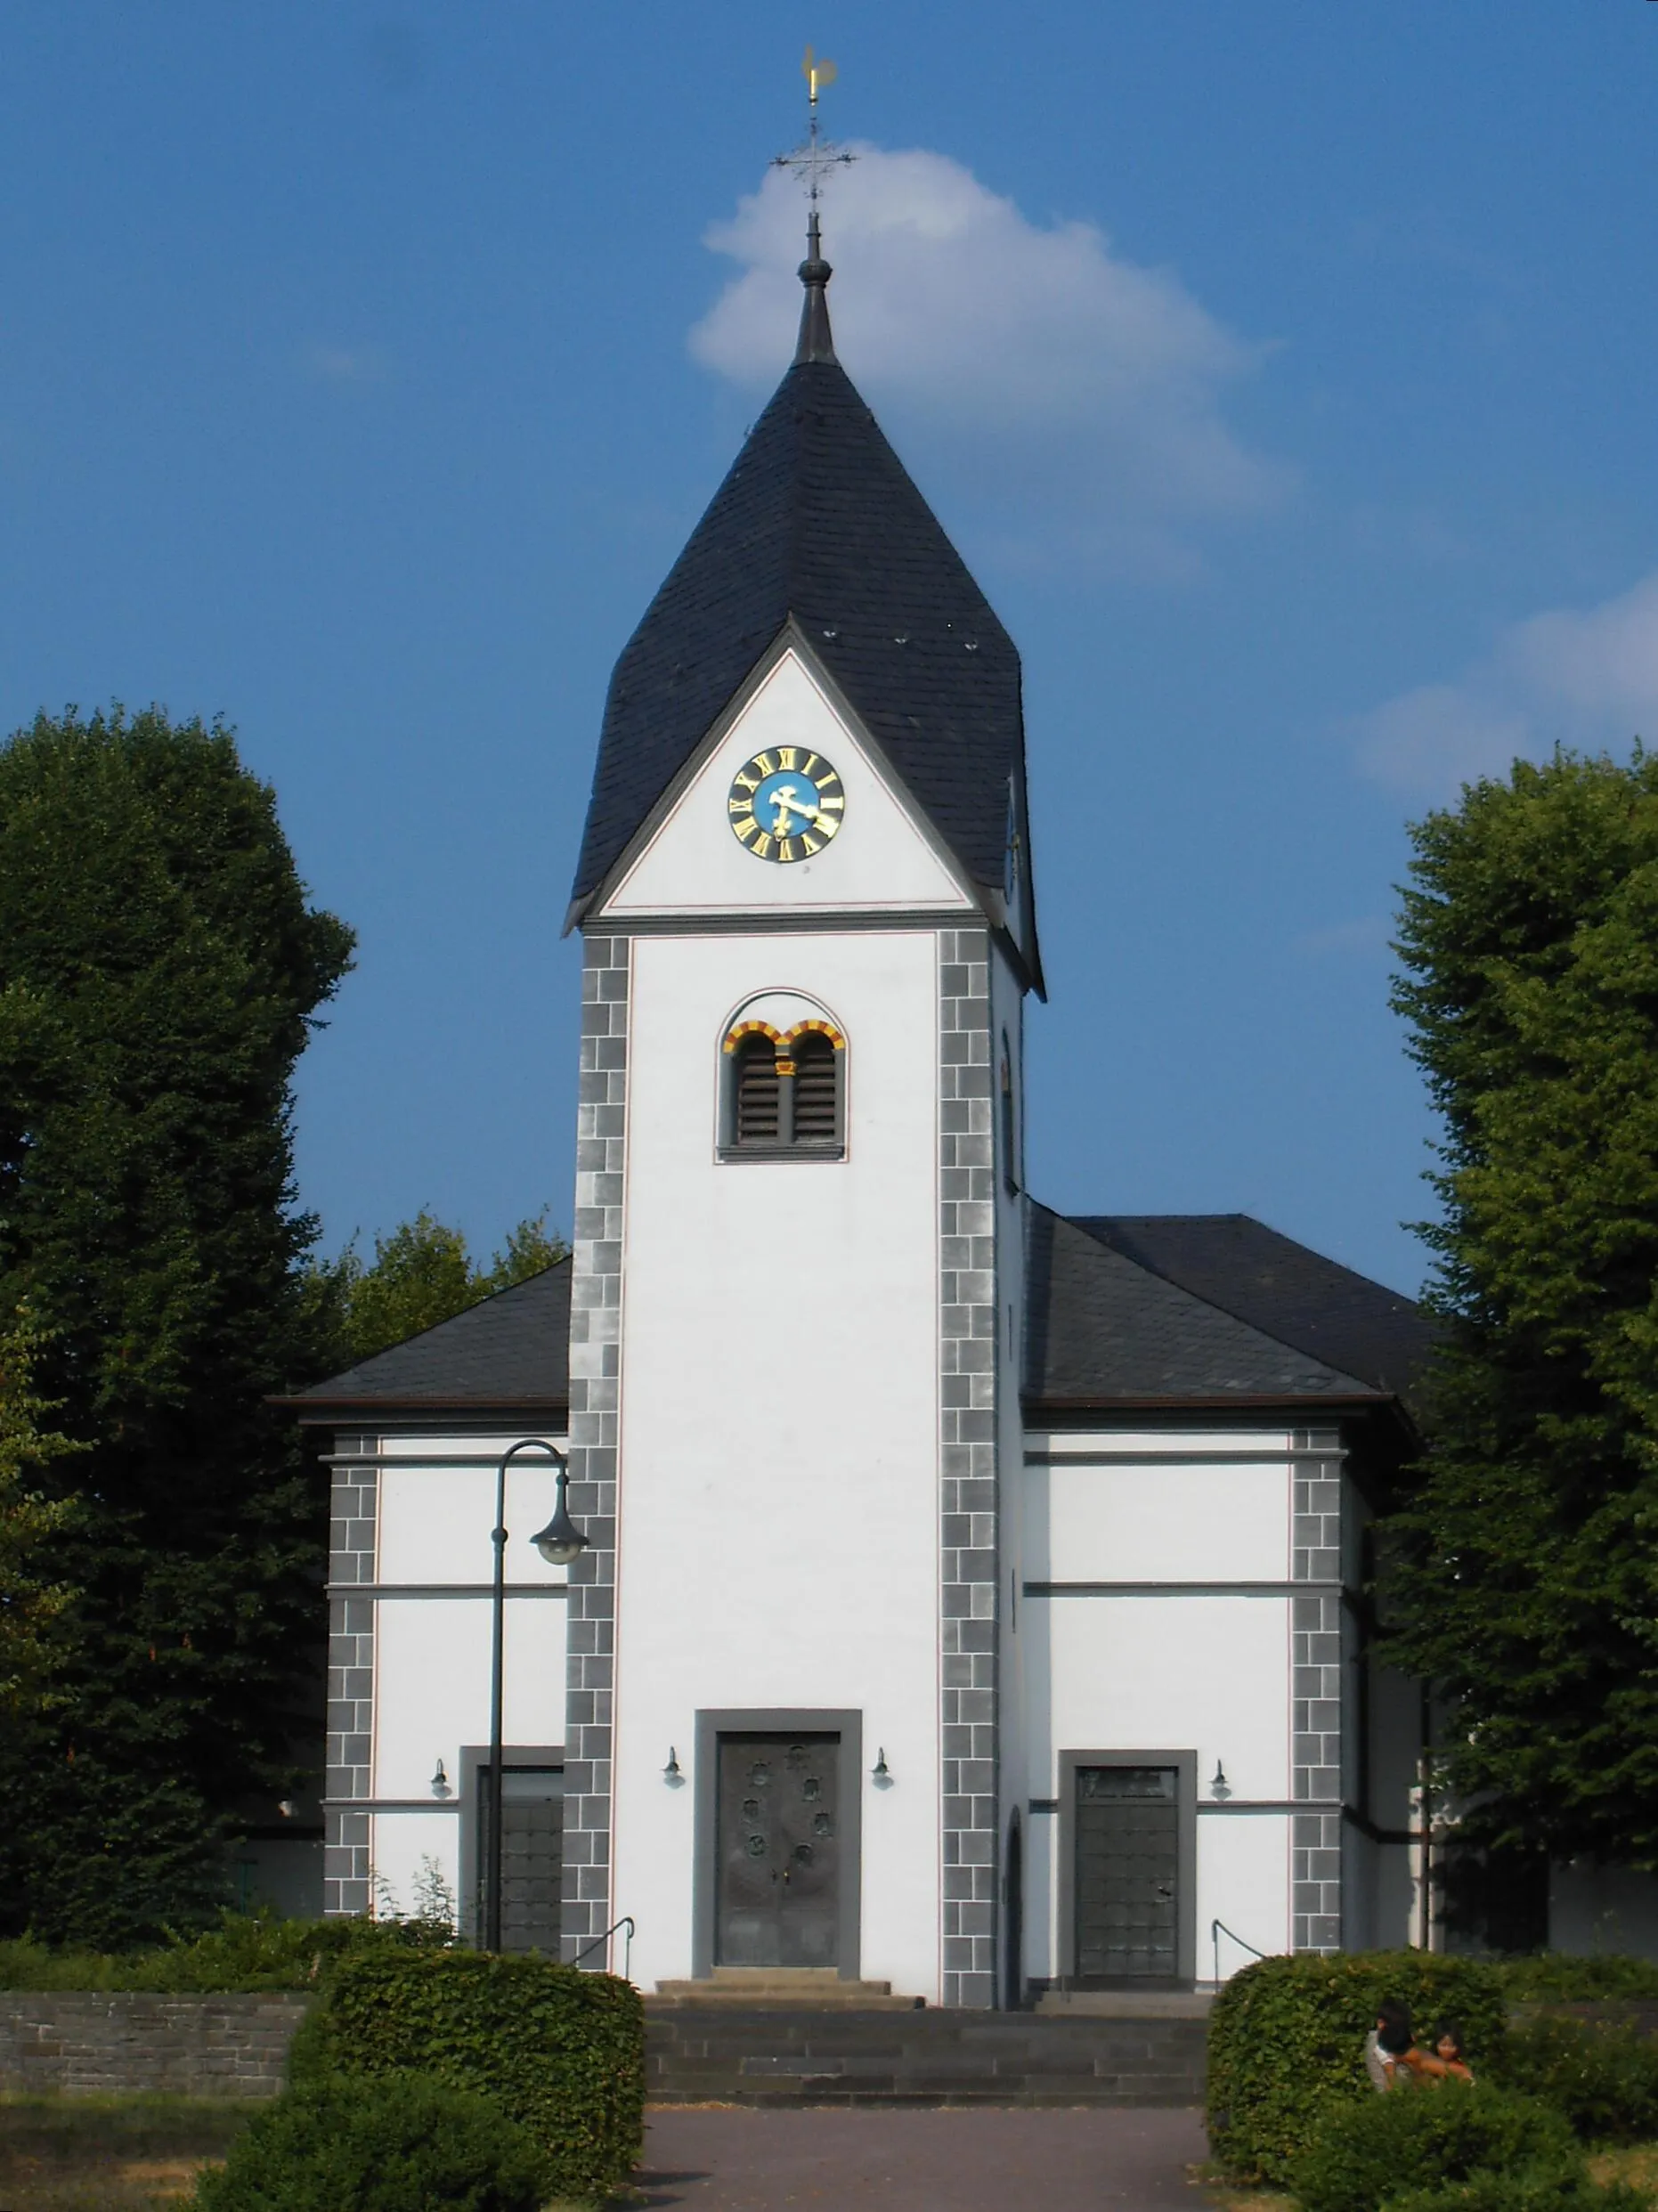 Photo showing: St. Aegidius church in Aegidienberg, a municipal district of Bad Honnef. The church was constructed in the 12th century. It's the landmark of Aegidienberg and is located on an far visible elevation.